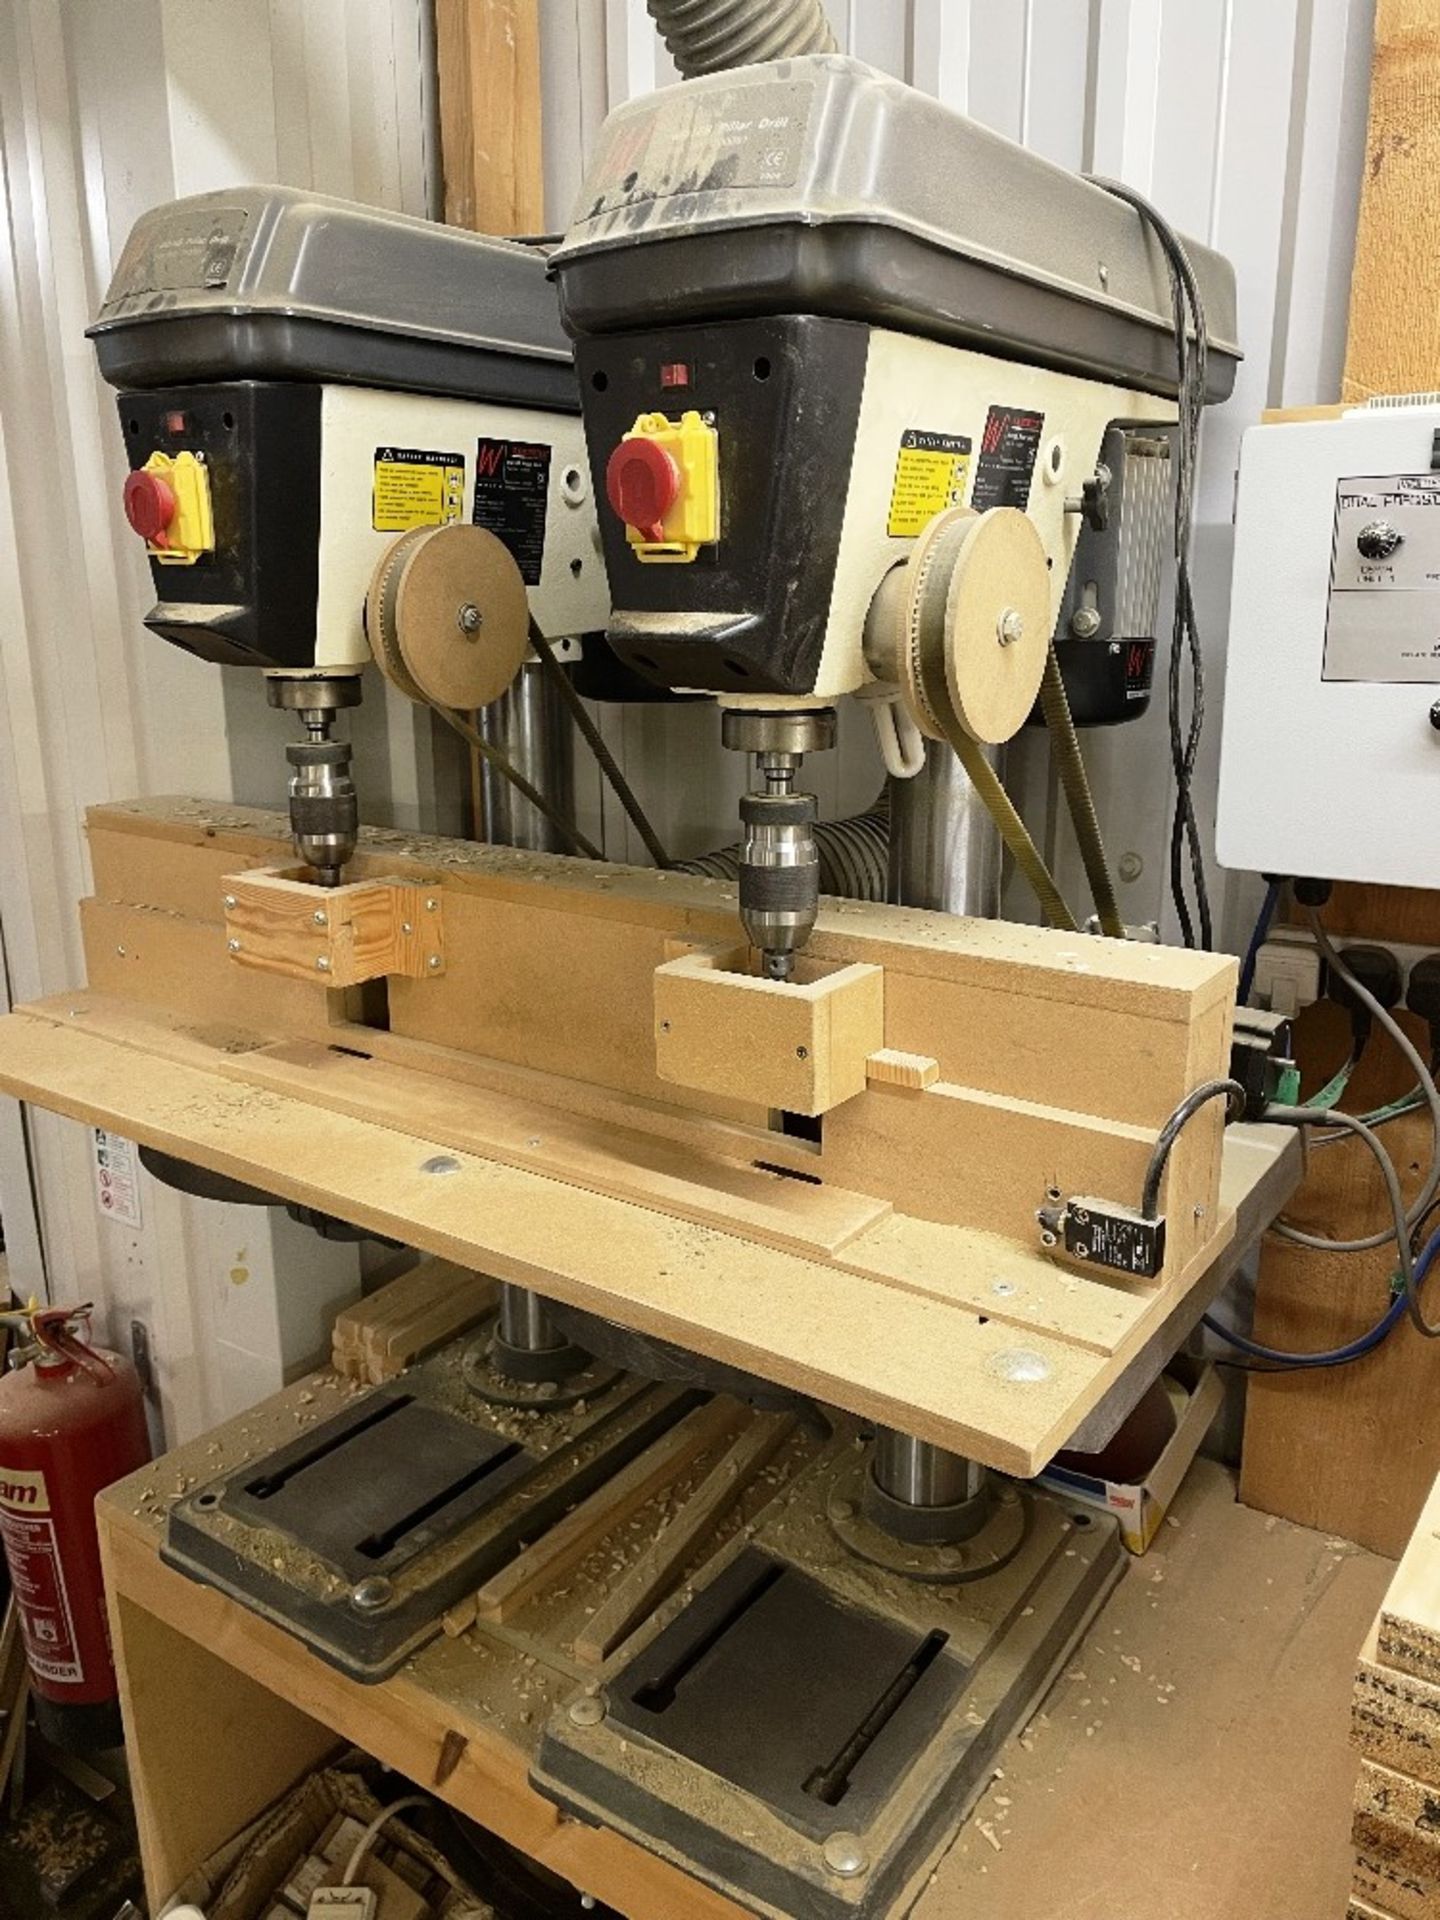 2 x Axminster WD16B Bench Pillar Drills w/ Automated Modifications - Image 2 of 9